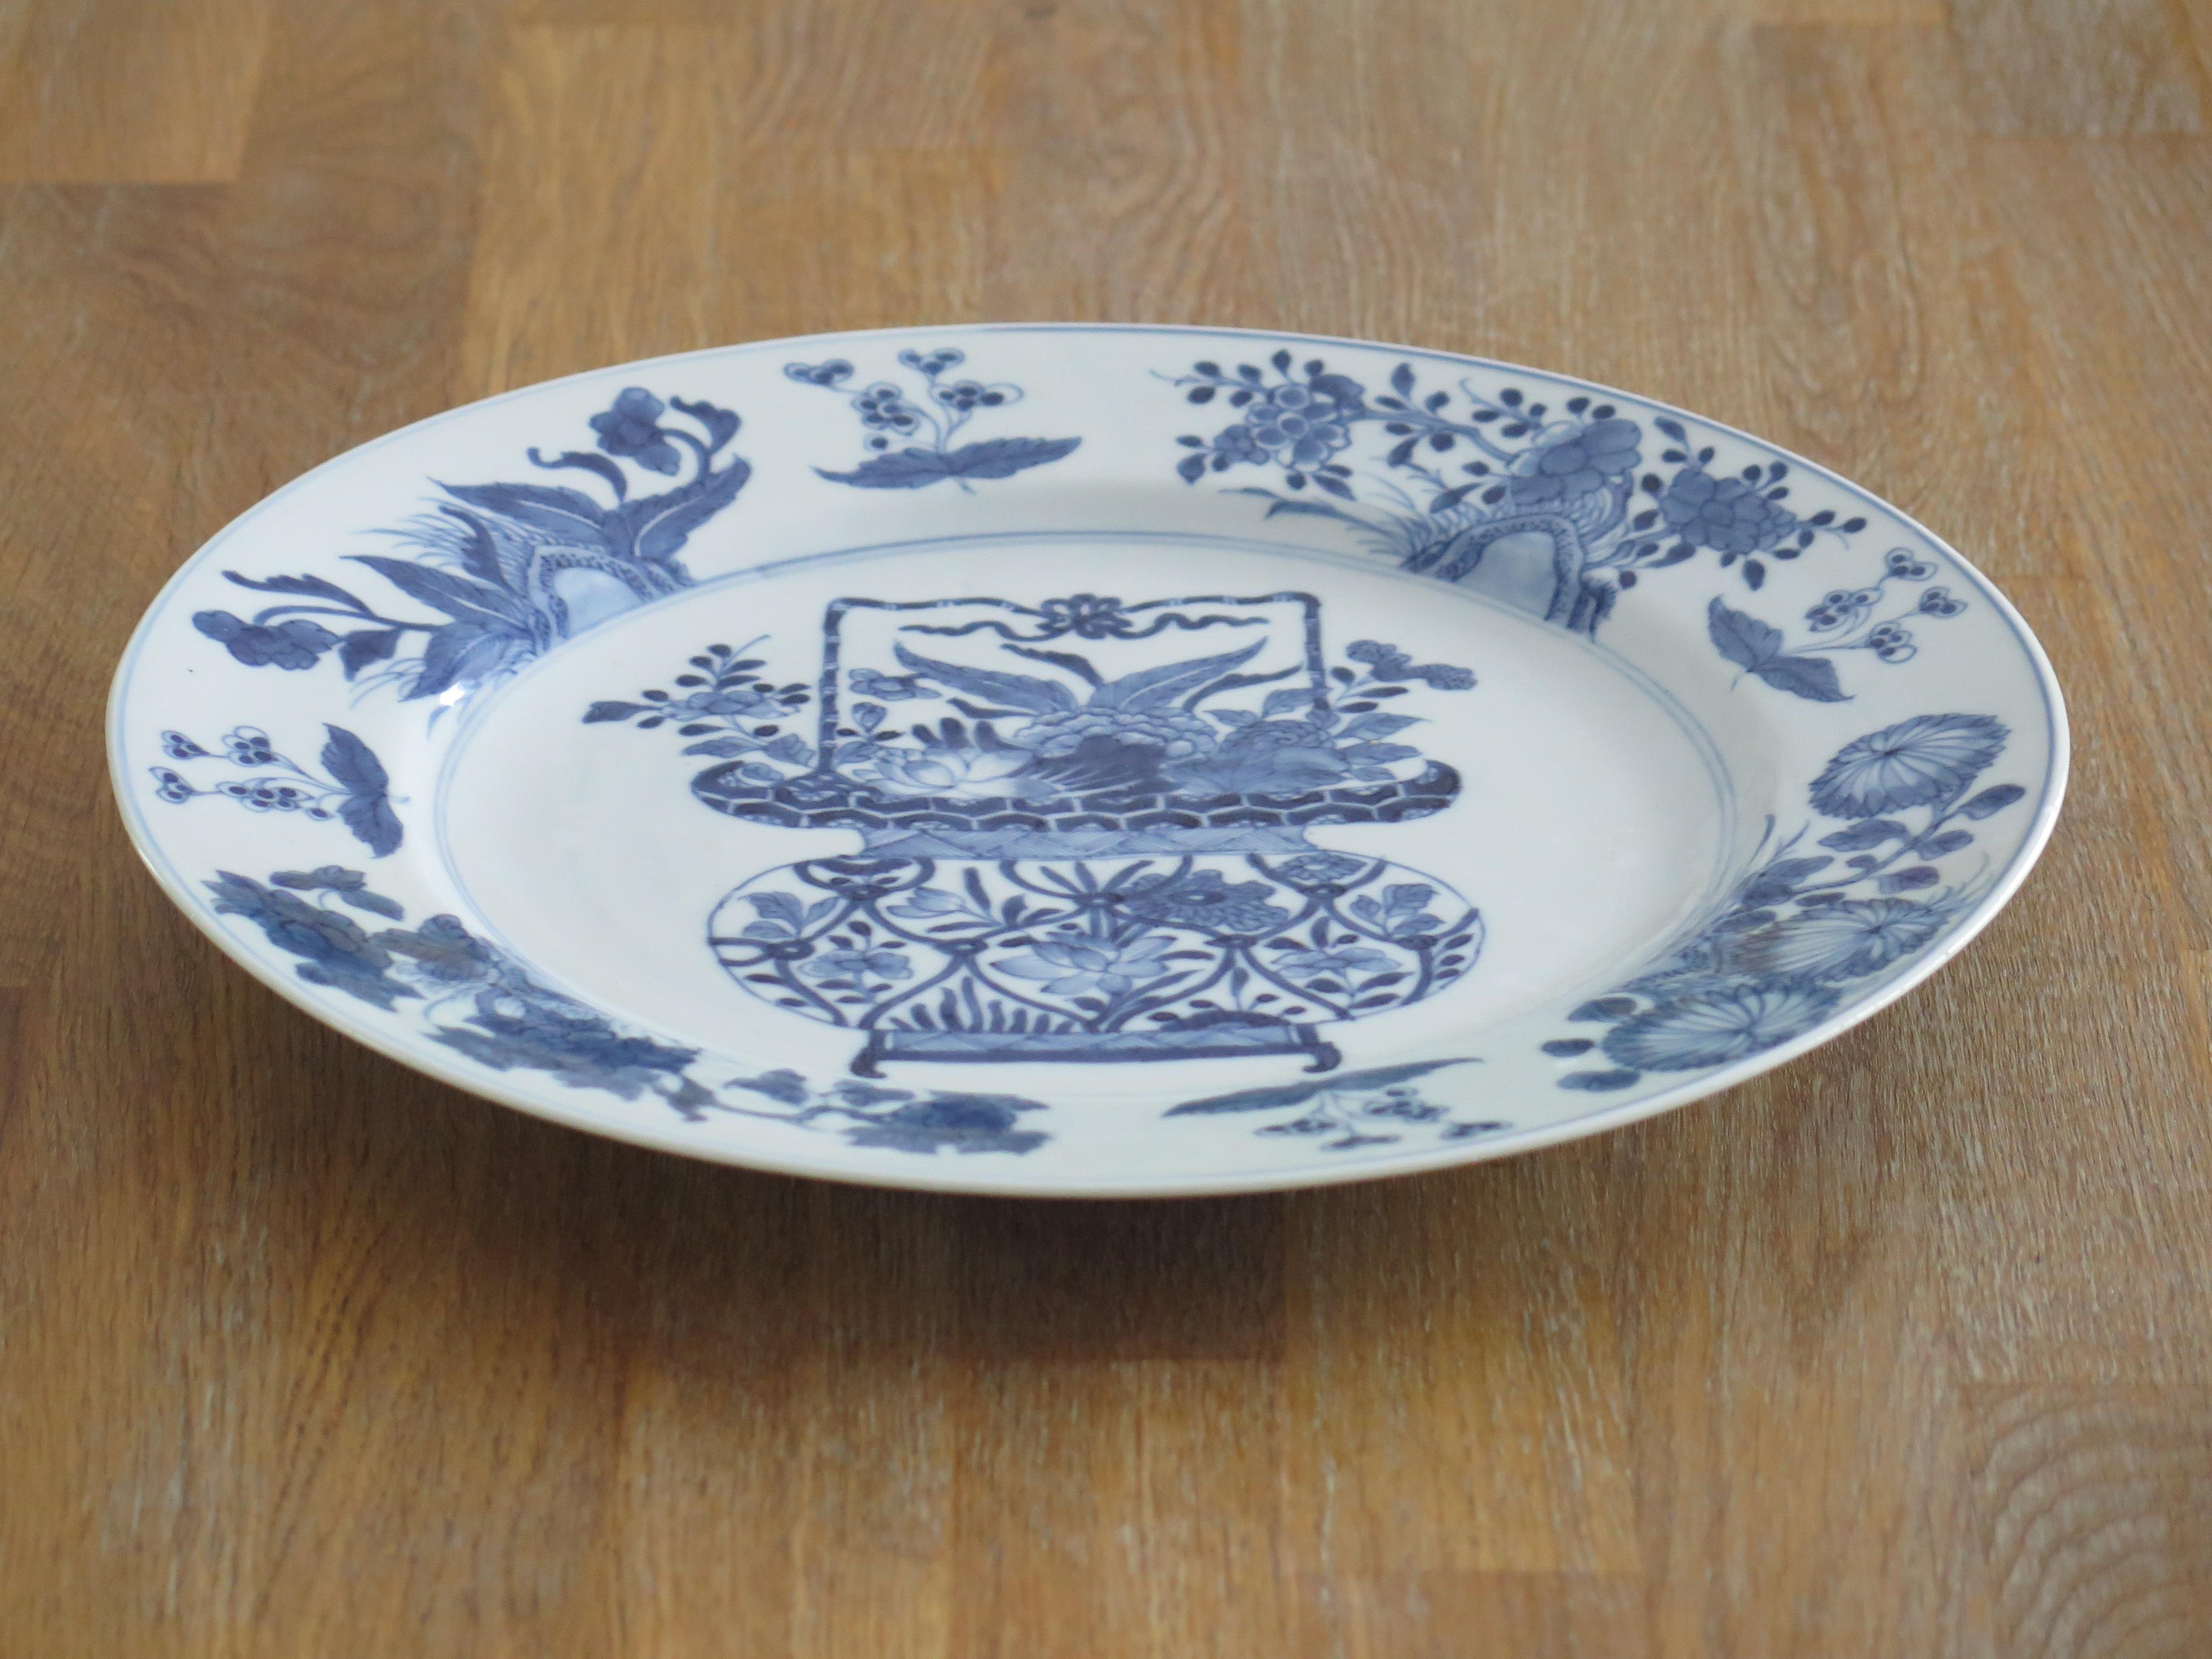 Kangxi Mark and period Chinese Large Plate Porcelain Blue & White, circa 1700 4